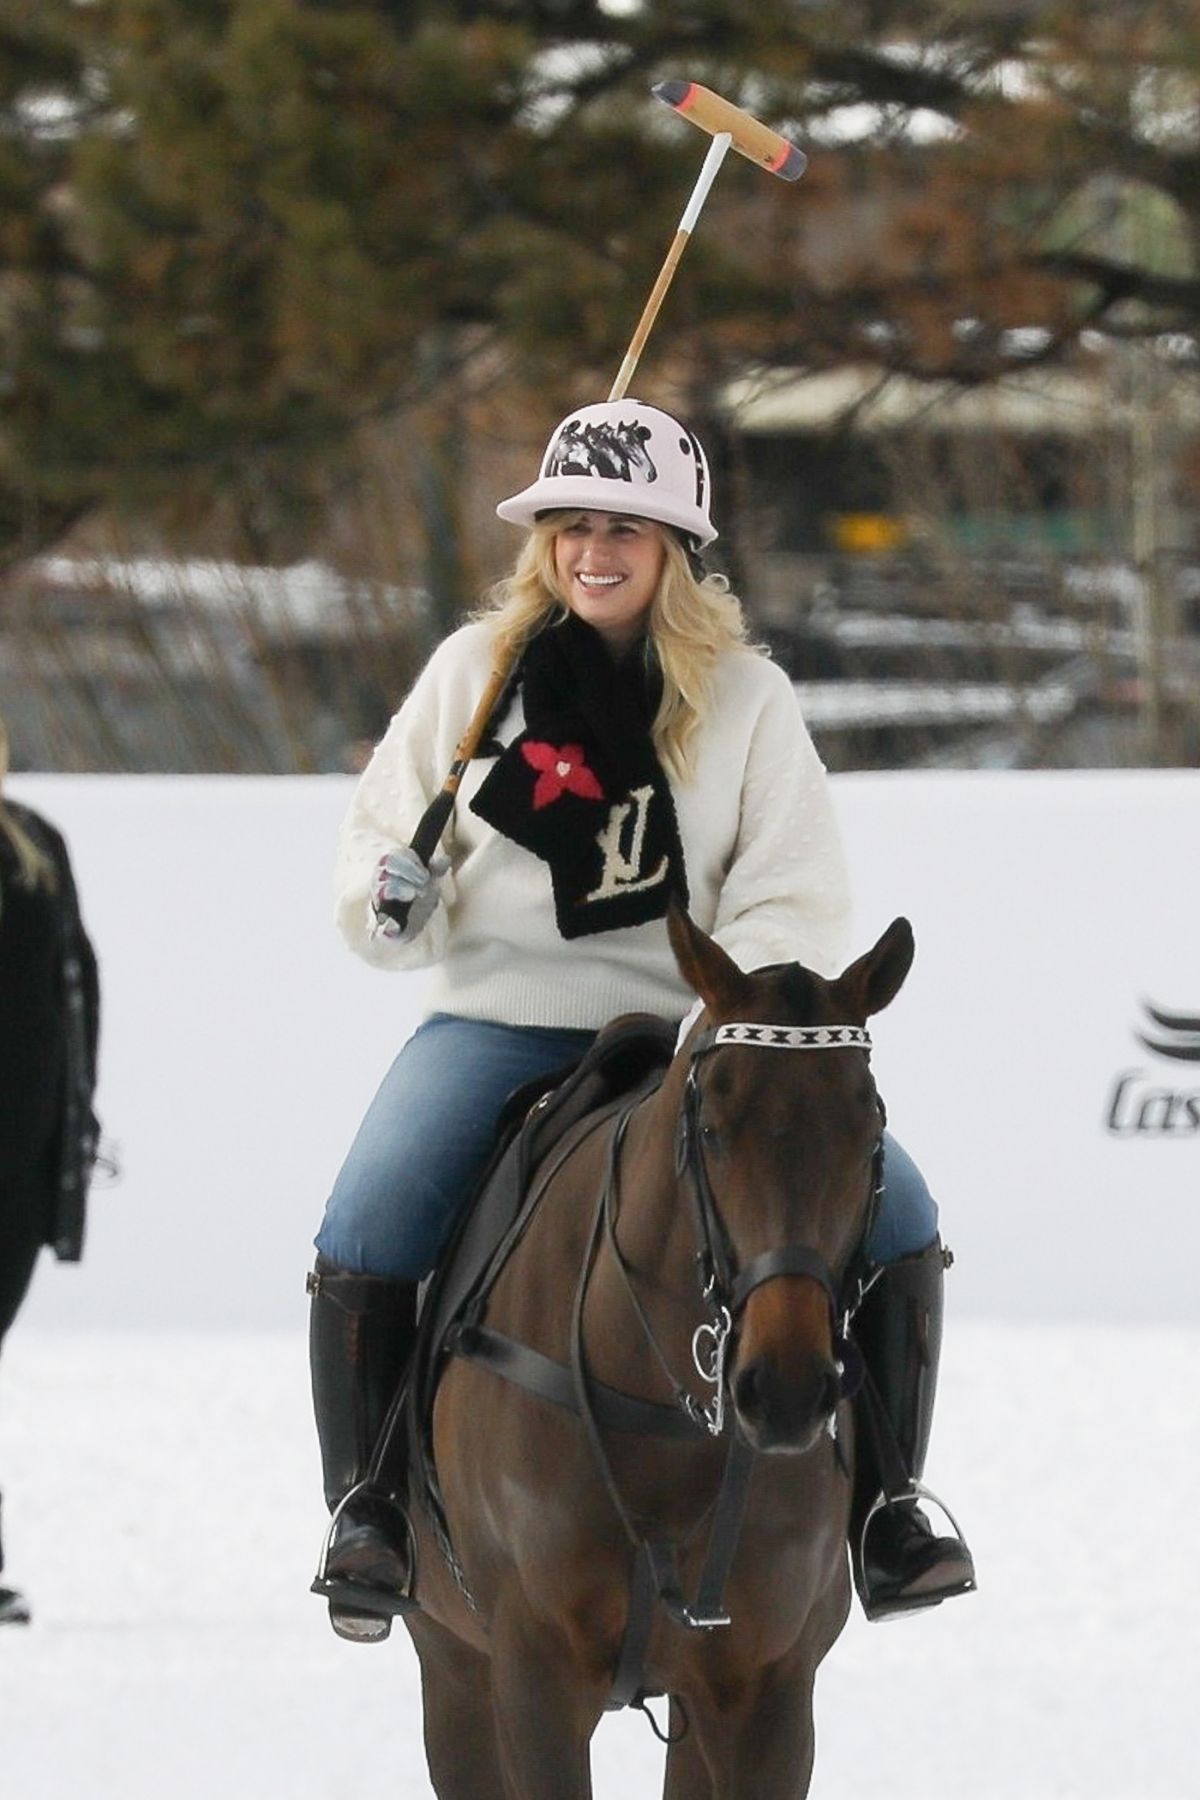 rebel-wilson-playing-polo-on-vacation-in-aspen-12-19-2020-3.jpg